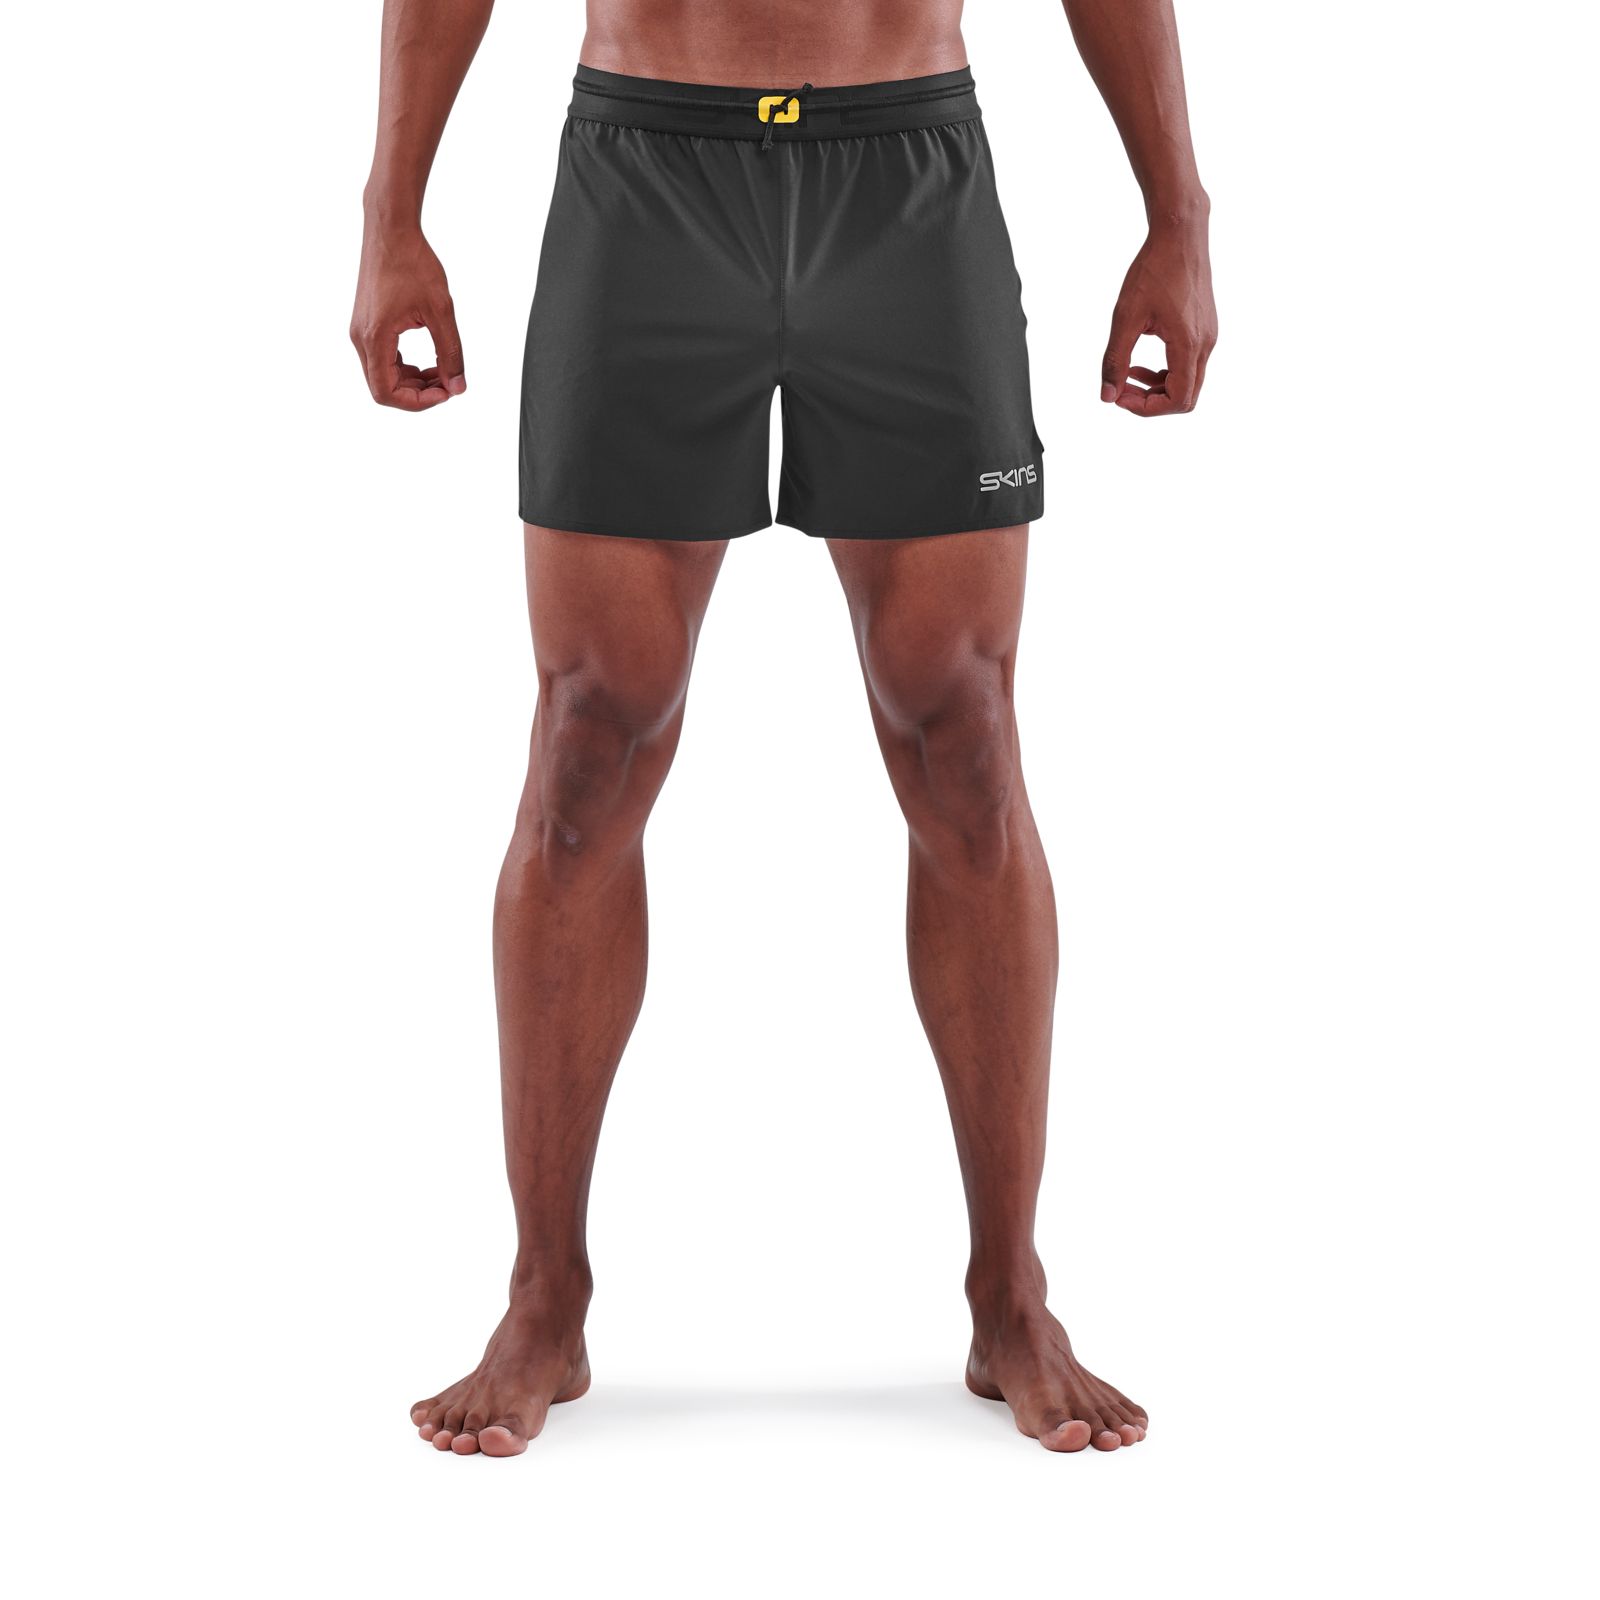 VAMON Compression Men's Skin Tight Shorts for Gym, Running, More